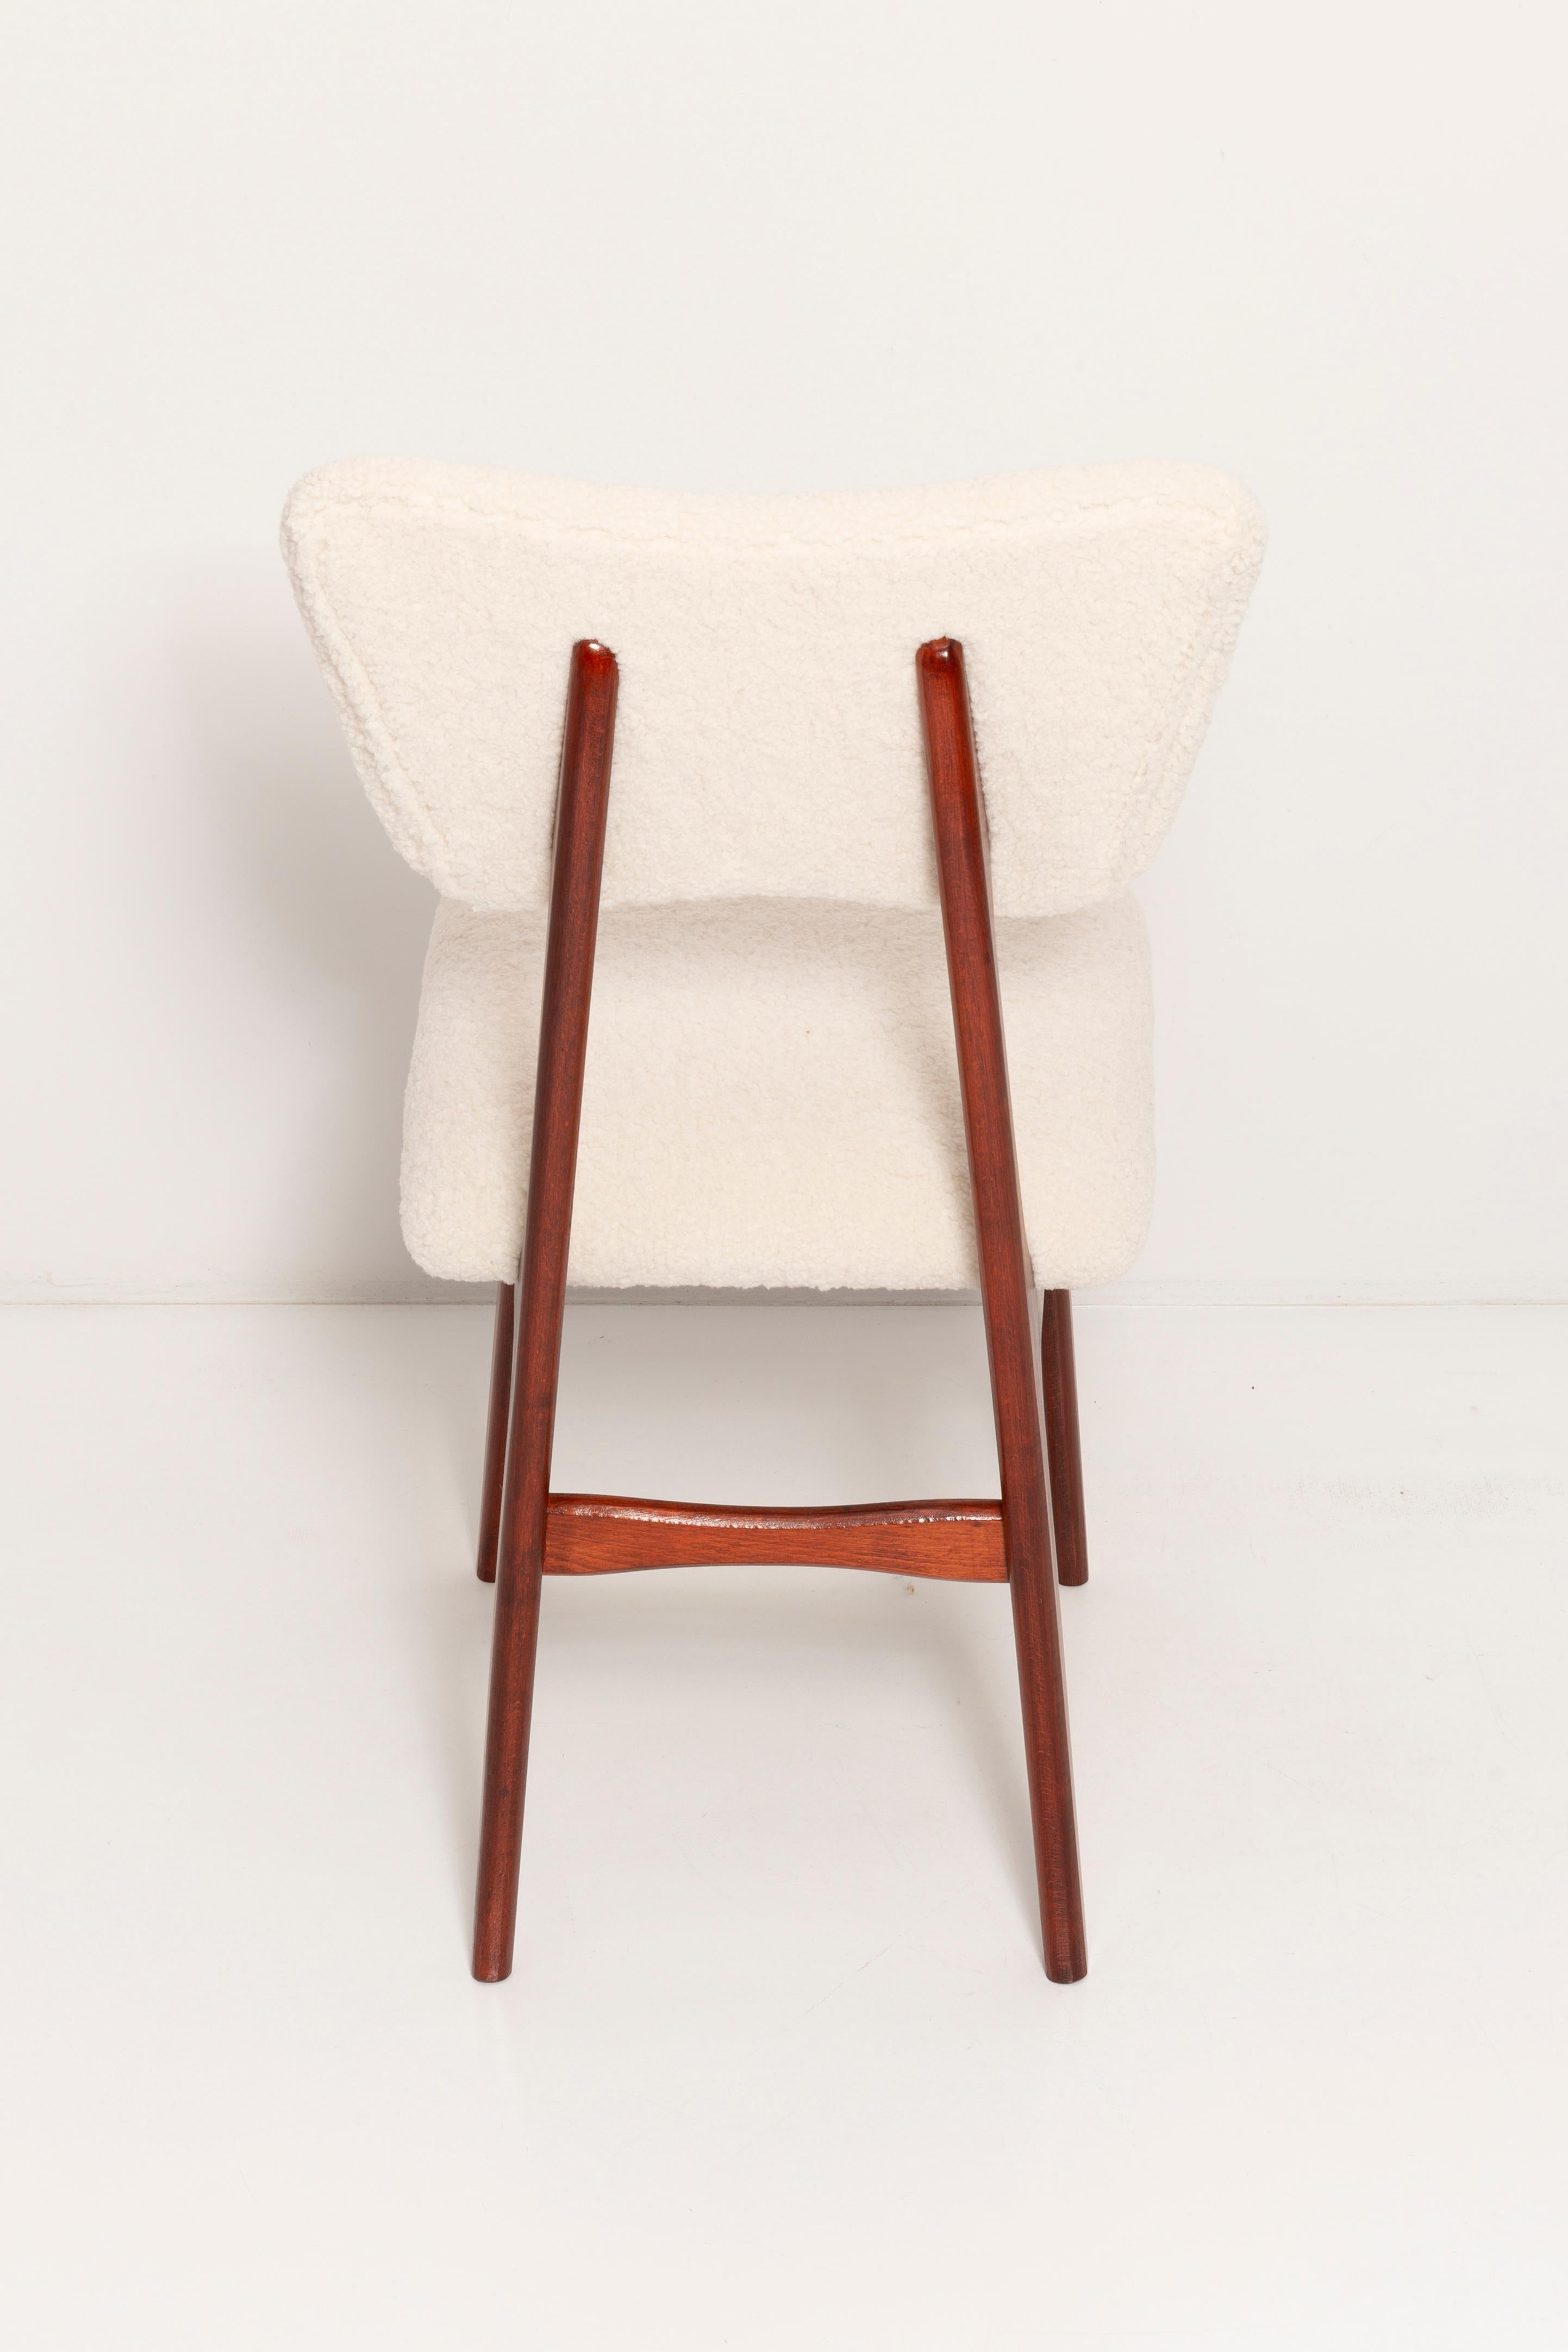 Two 20th Century Chairs in Light Creme and Cherry Wood Boucle, Europe, 1960s For Sale 5